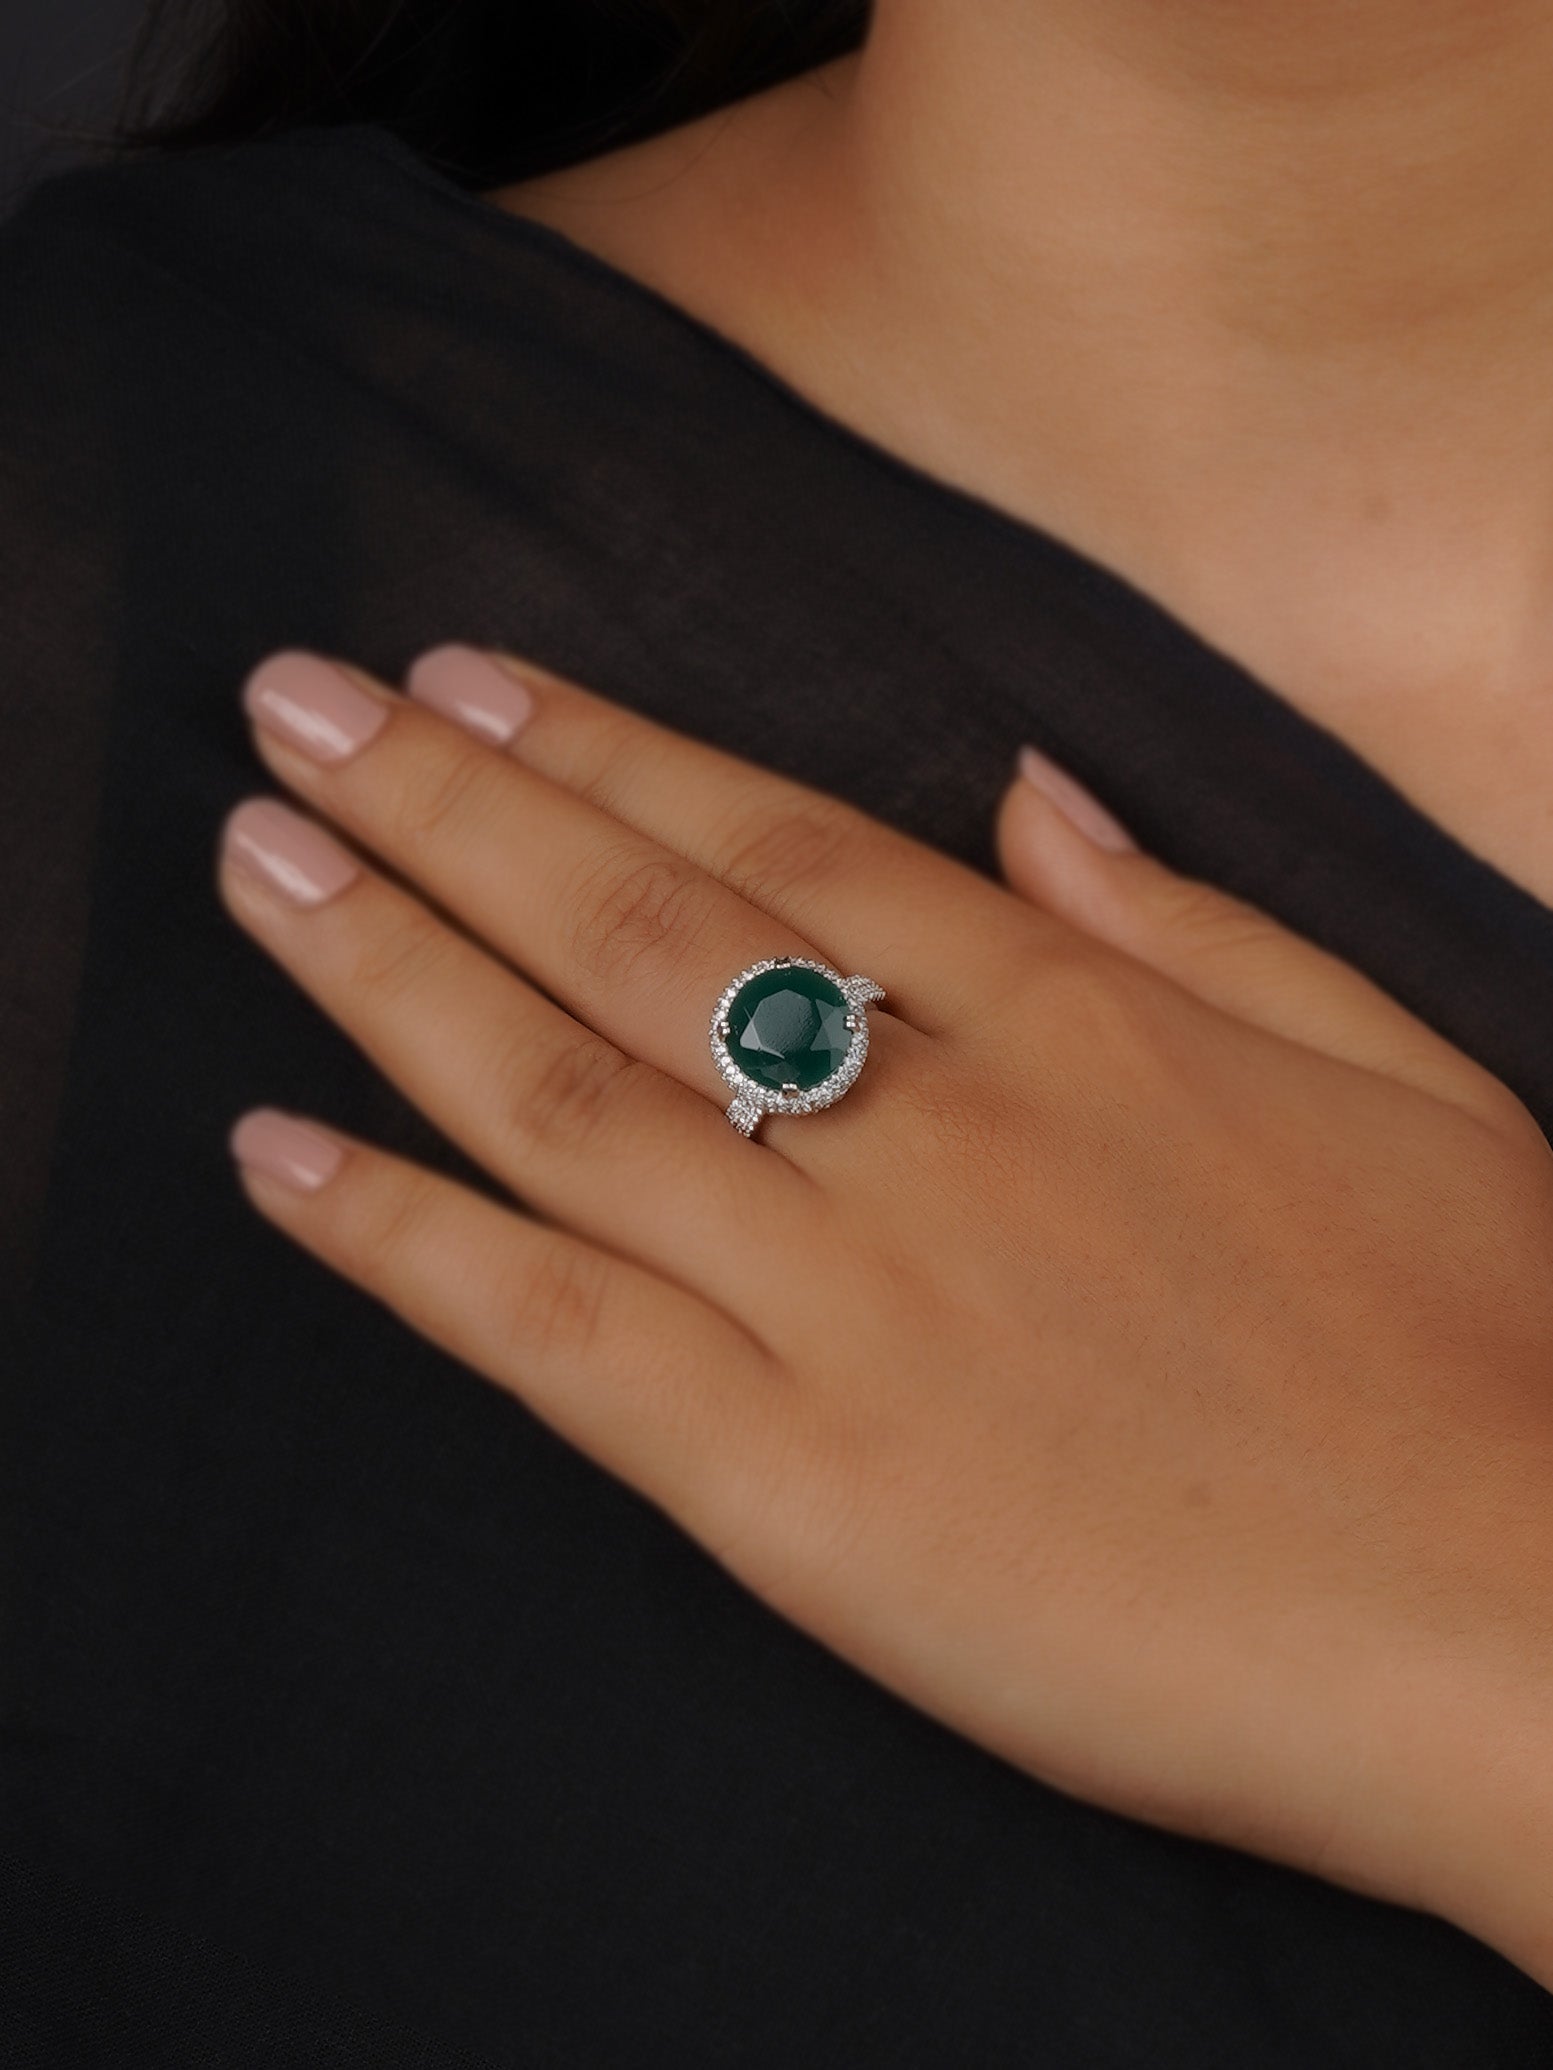 CZRNG106GR - Green Color Silver Plated Faux Diamond Ring